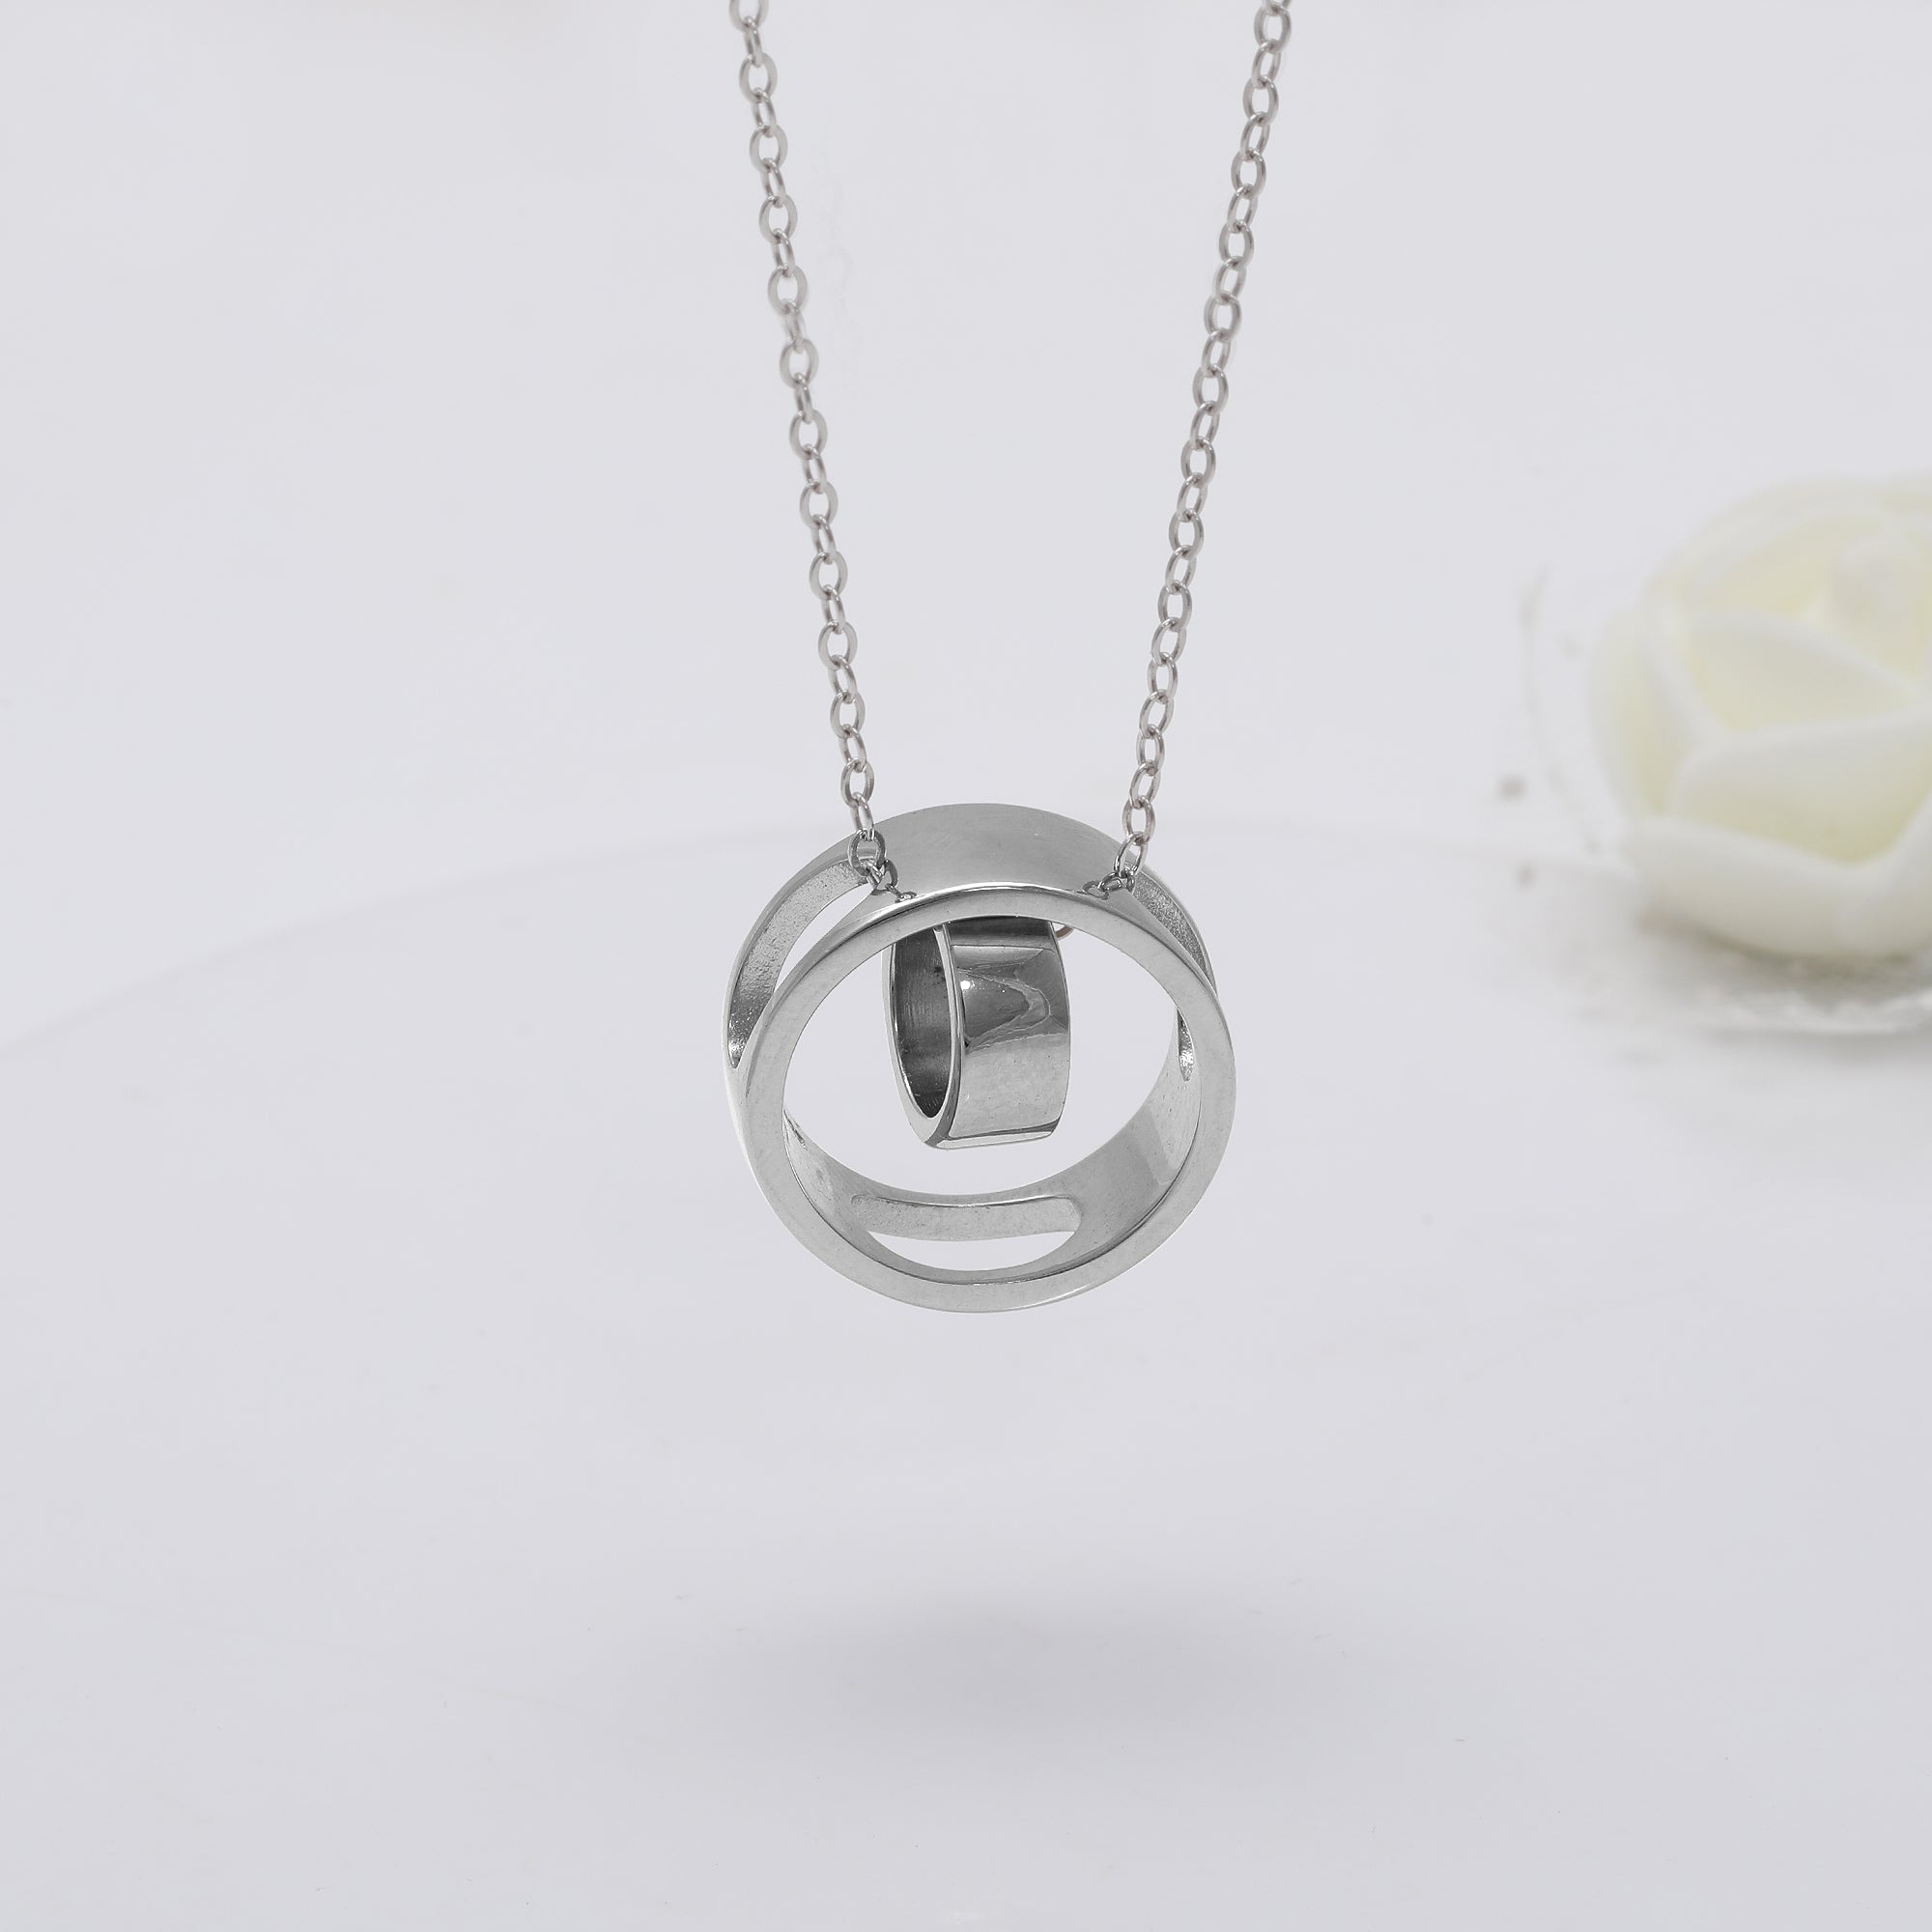 Andsion Silver Chain Gold Chain for Men Women Boys India | Ubuy